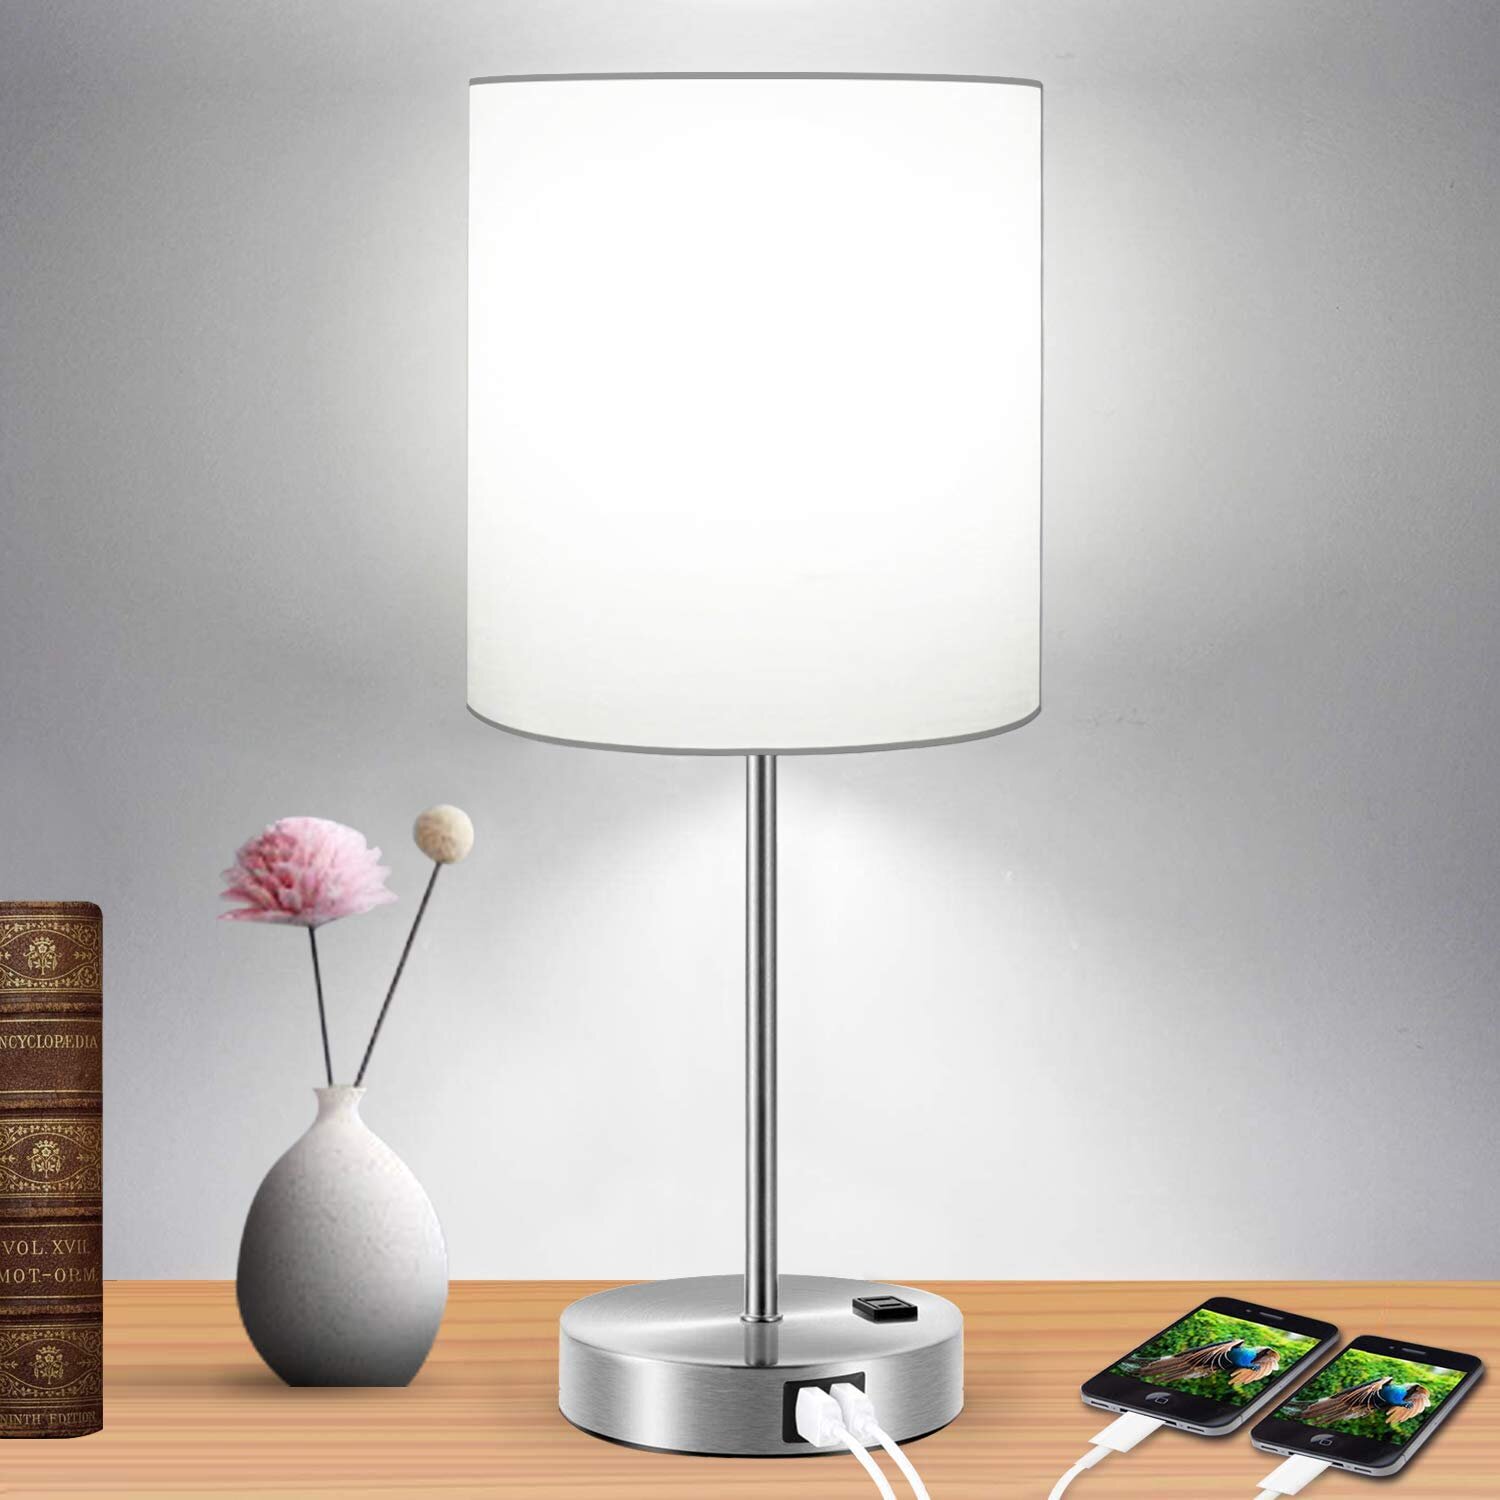 3 Way Dimmable Vintage Nightstand Lamp for Living Room Bedroom Office 6W LED Bulb Included Industrial Touch Control Table Lamp with 2 USB Charging Ports and 2 Power Outlets 